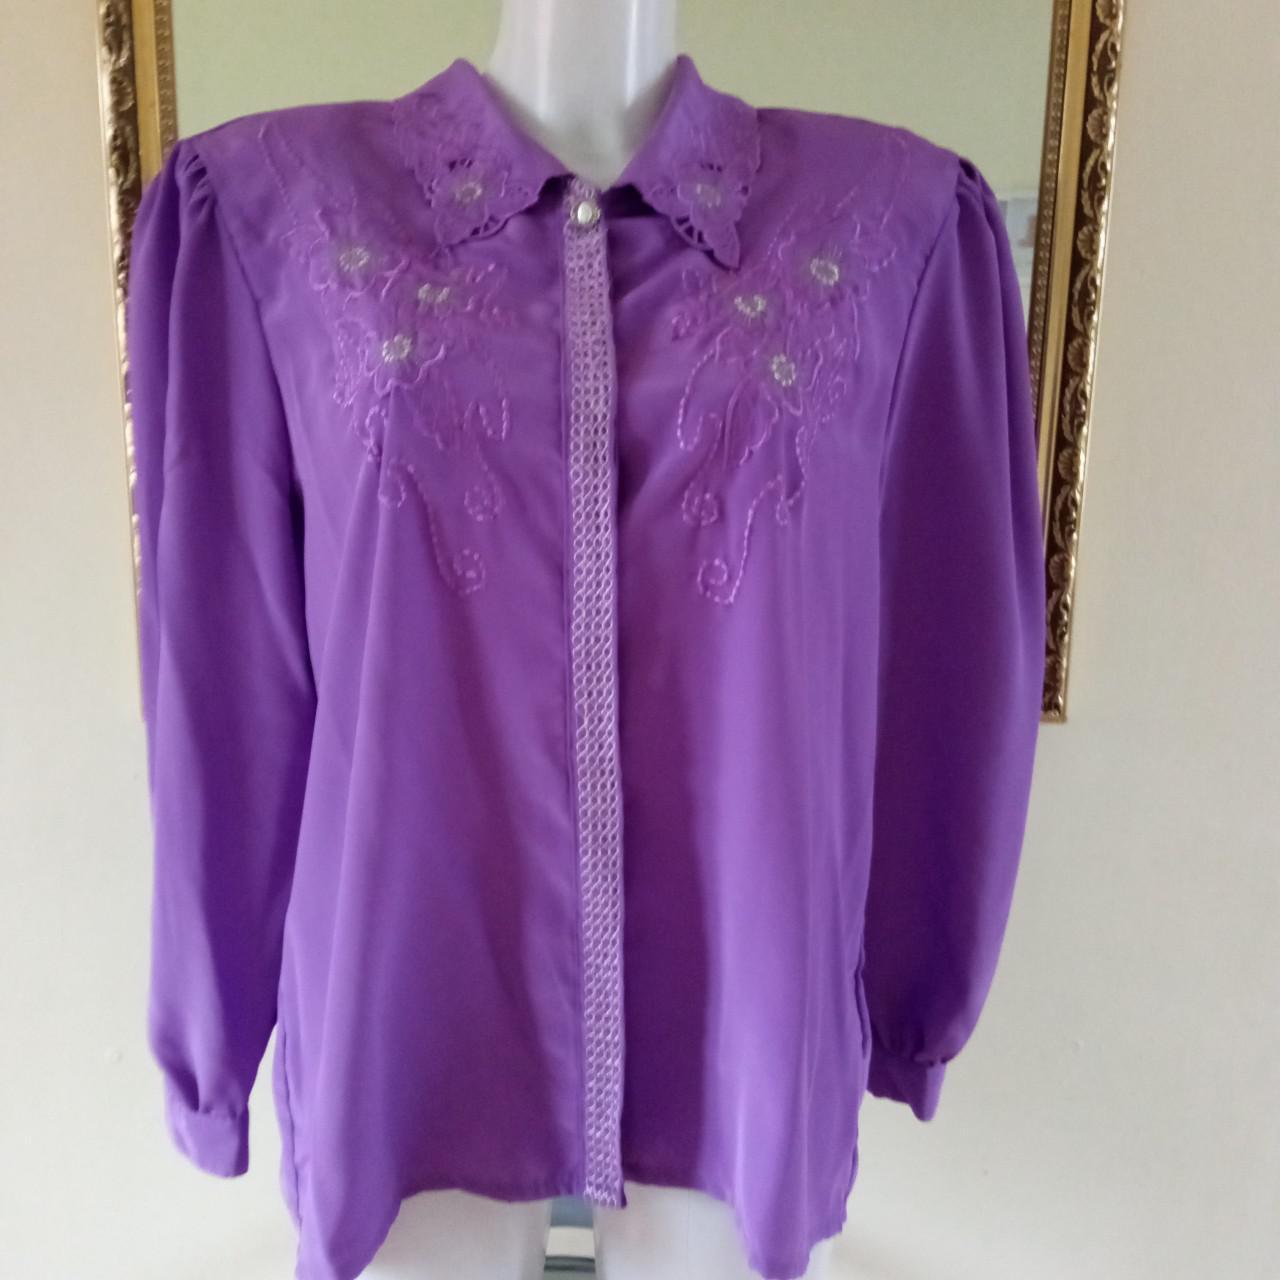 American Vintage Women's Purple and Silver Blouse (3)